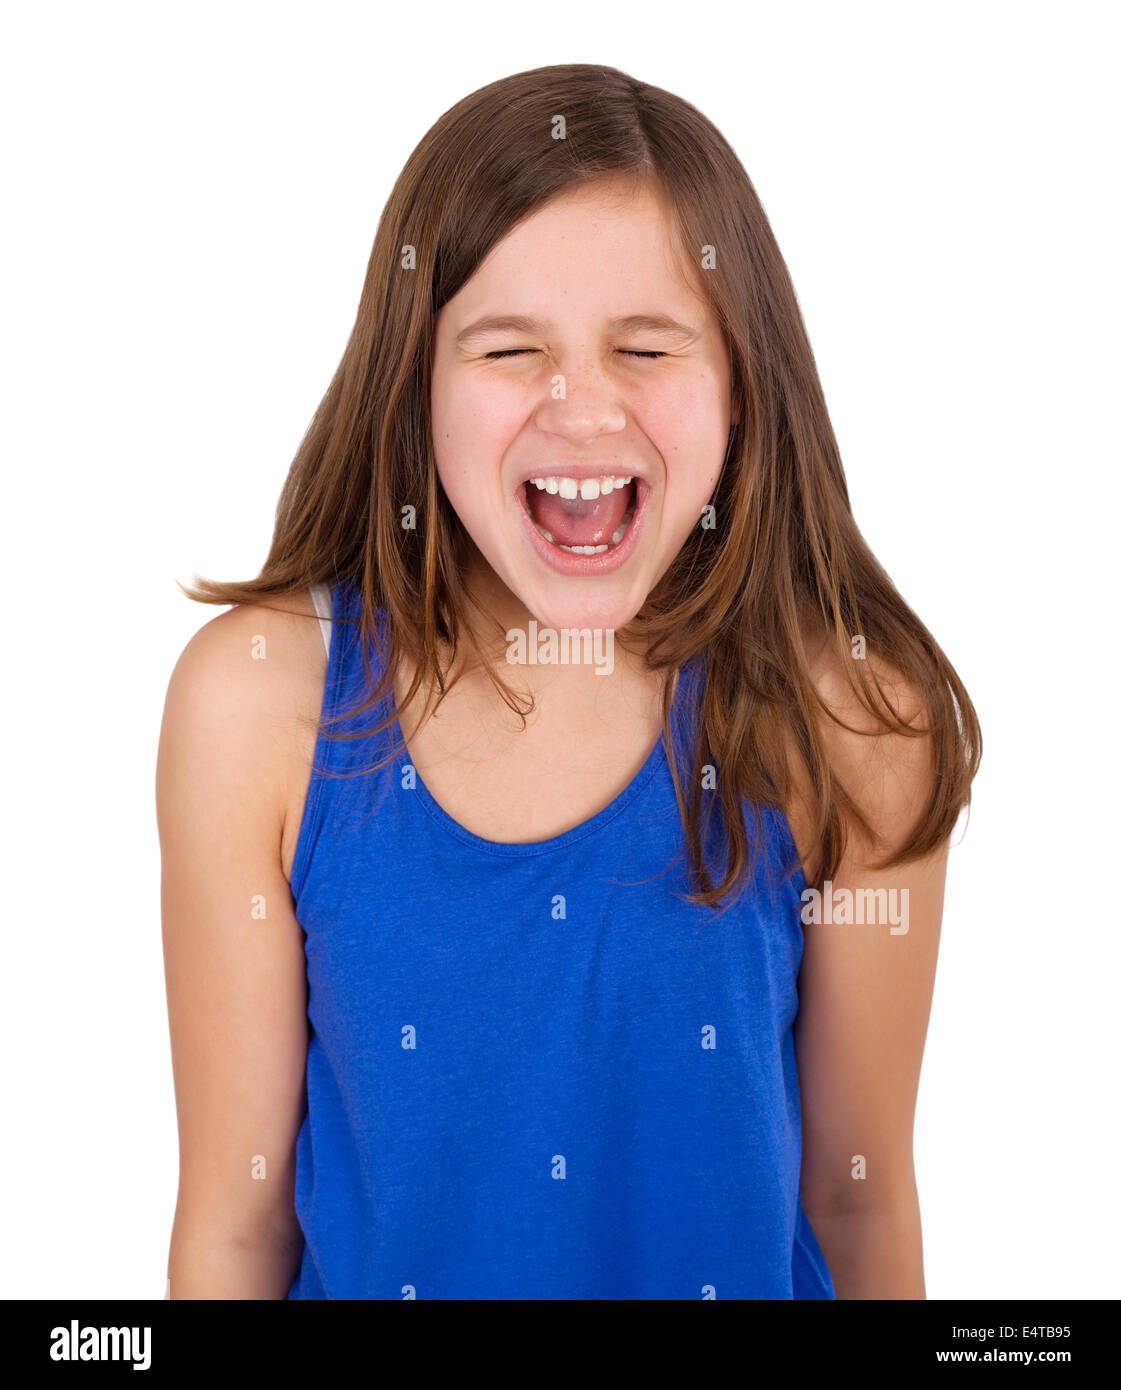 young girl screaming, isolated on white Stock Photo